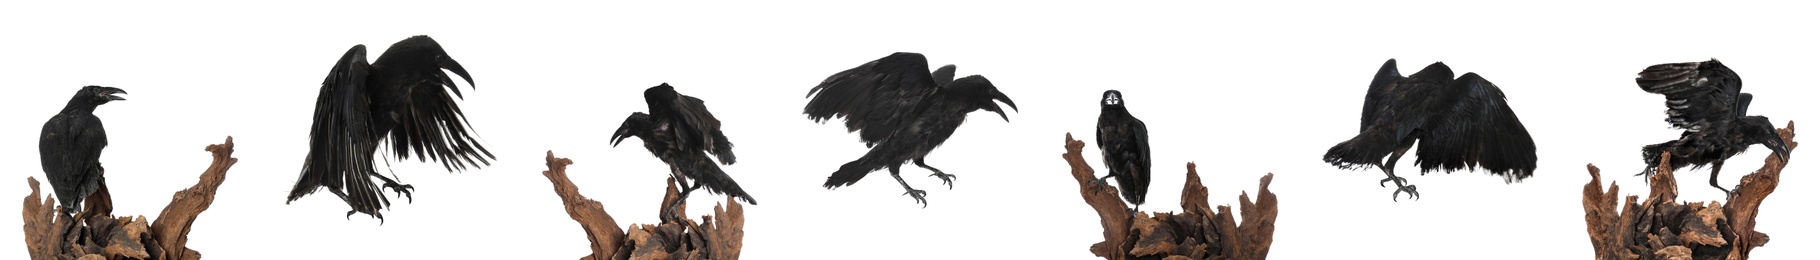 Image of Collage with black ravens on white background. Banner design 